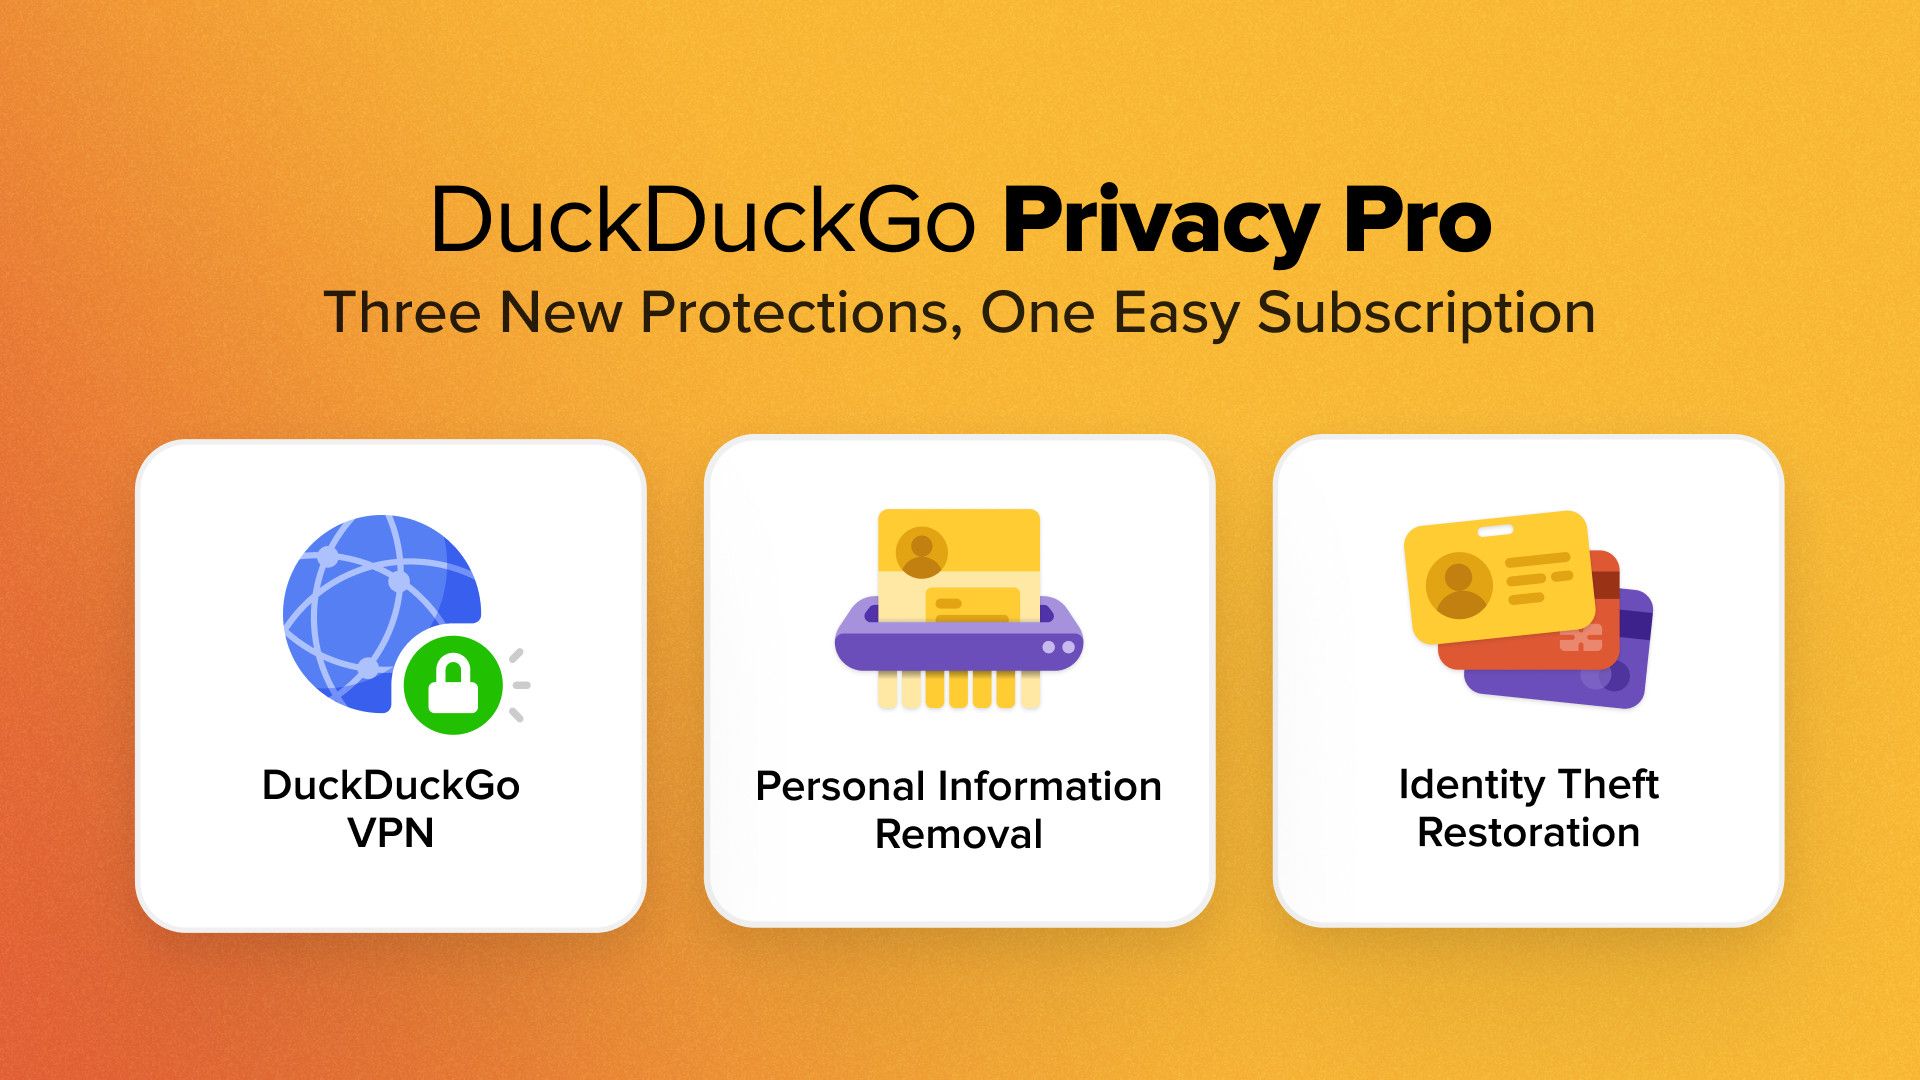 Meet DuckDuckGo Privacy Pro: a 3-in-1 subscription service with VPN, Personal Information Removal, and Identity Theft Restoration